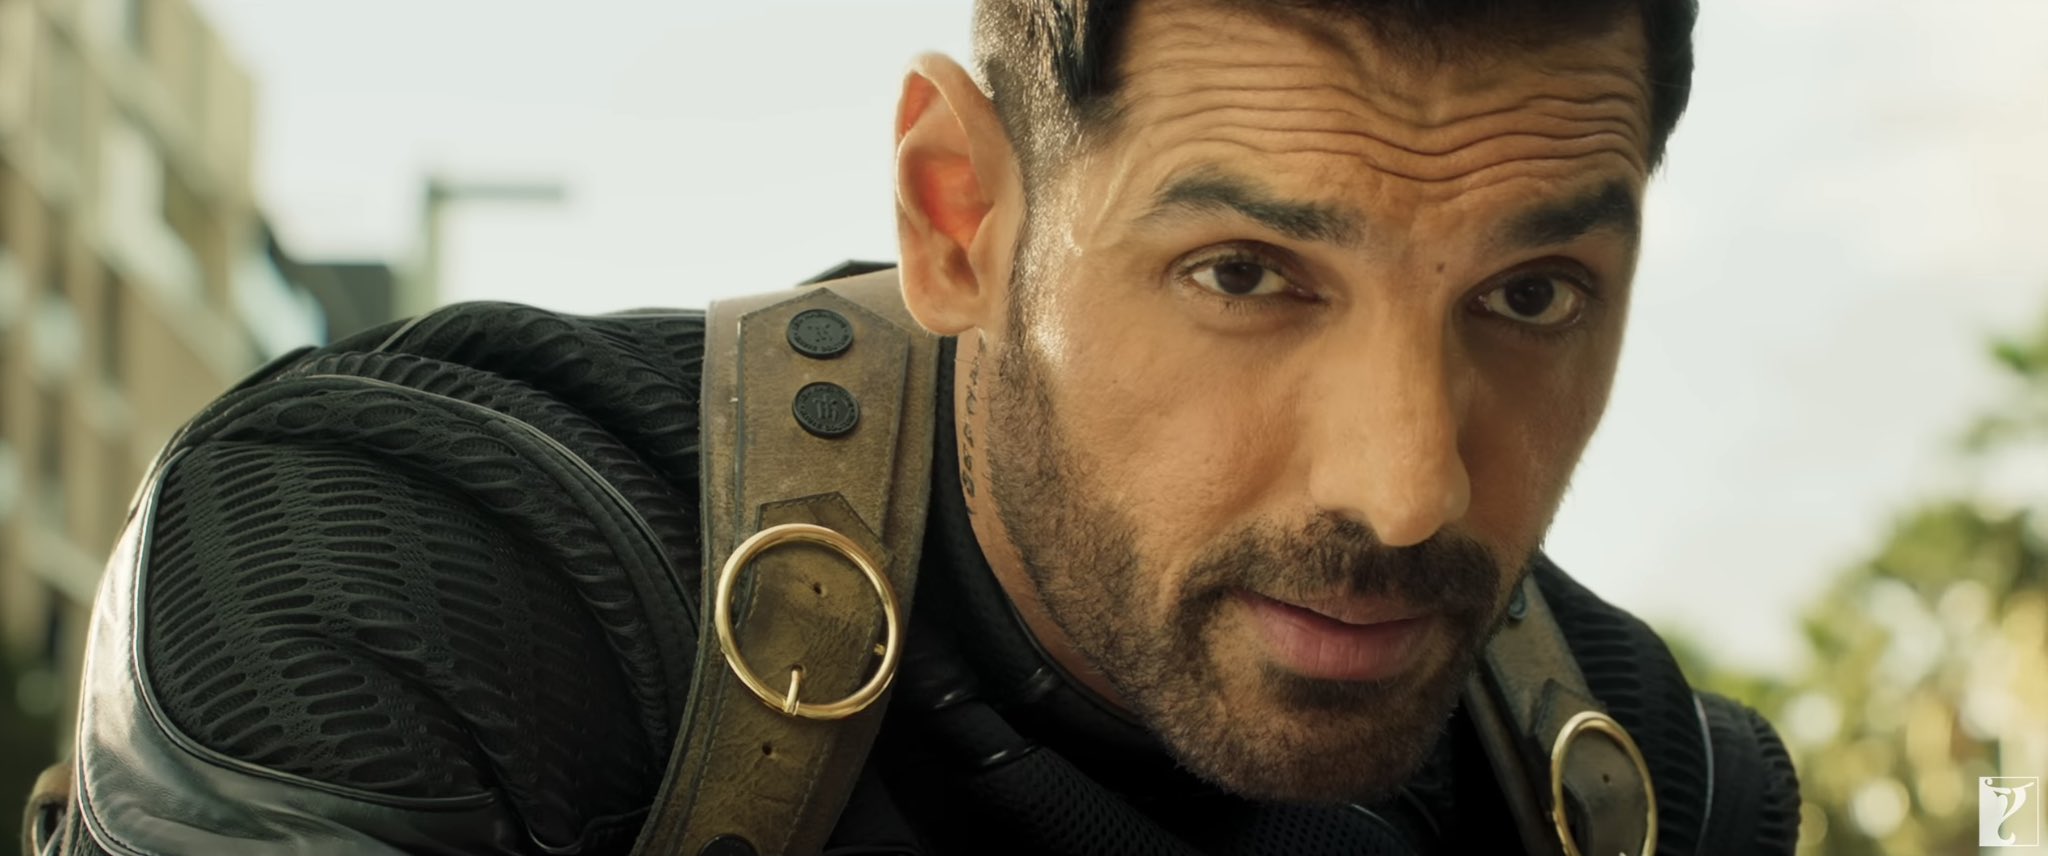 John Abraham s rift with Pathan s makers?